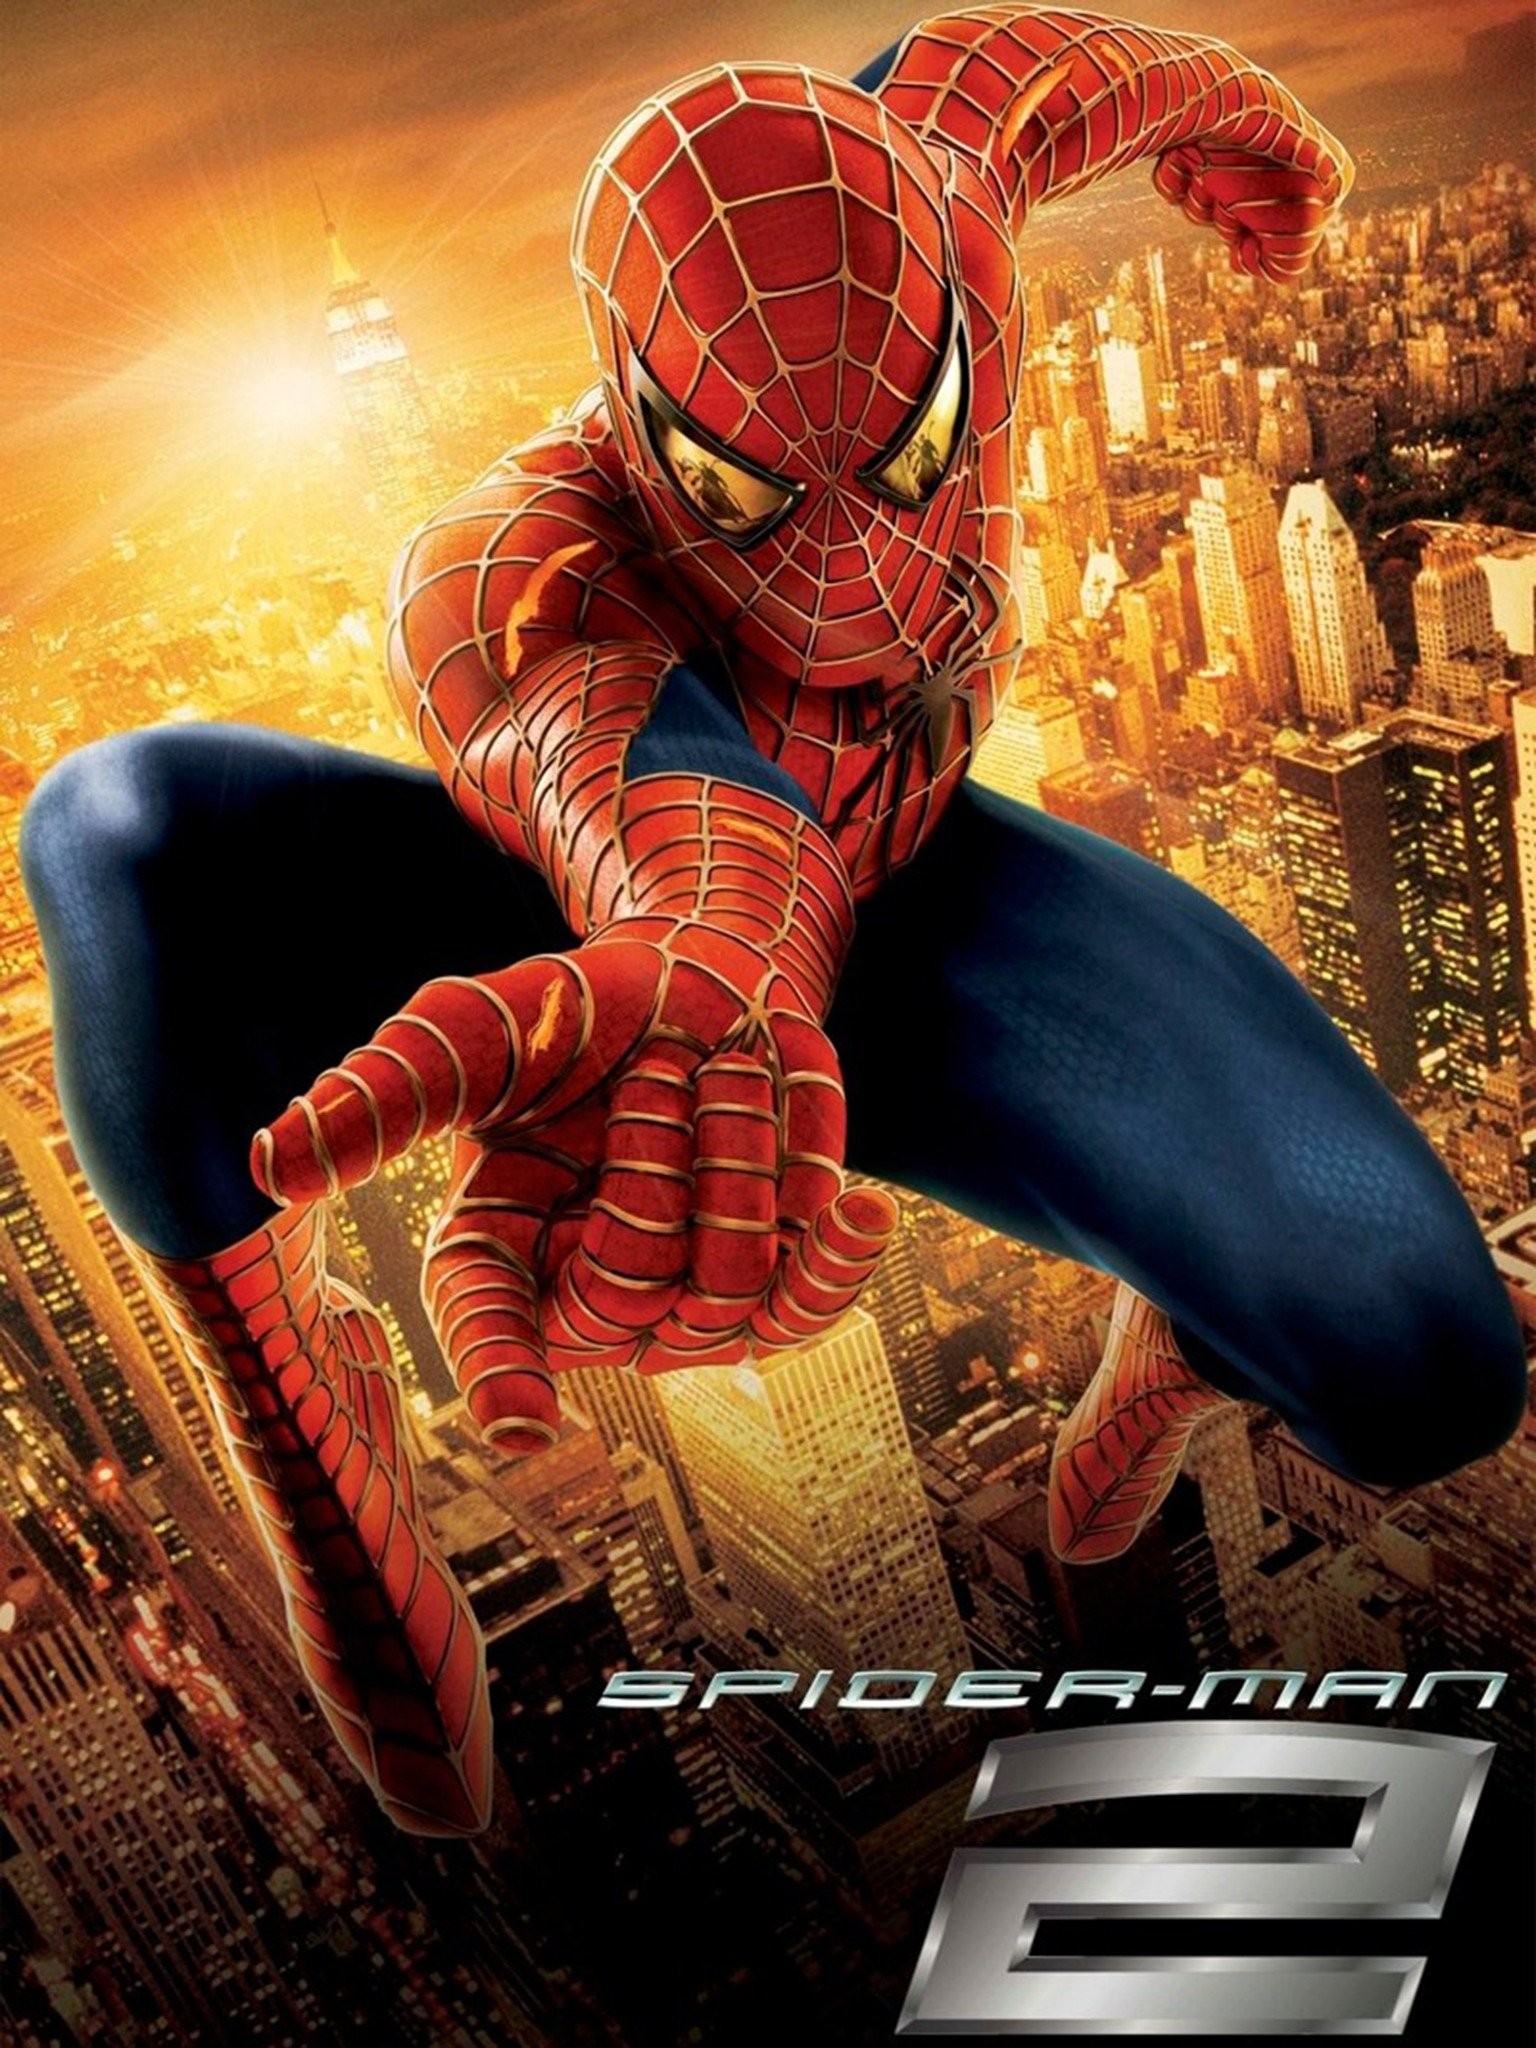 Spider-Man 2 - Rotten Tomatoes